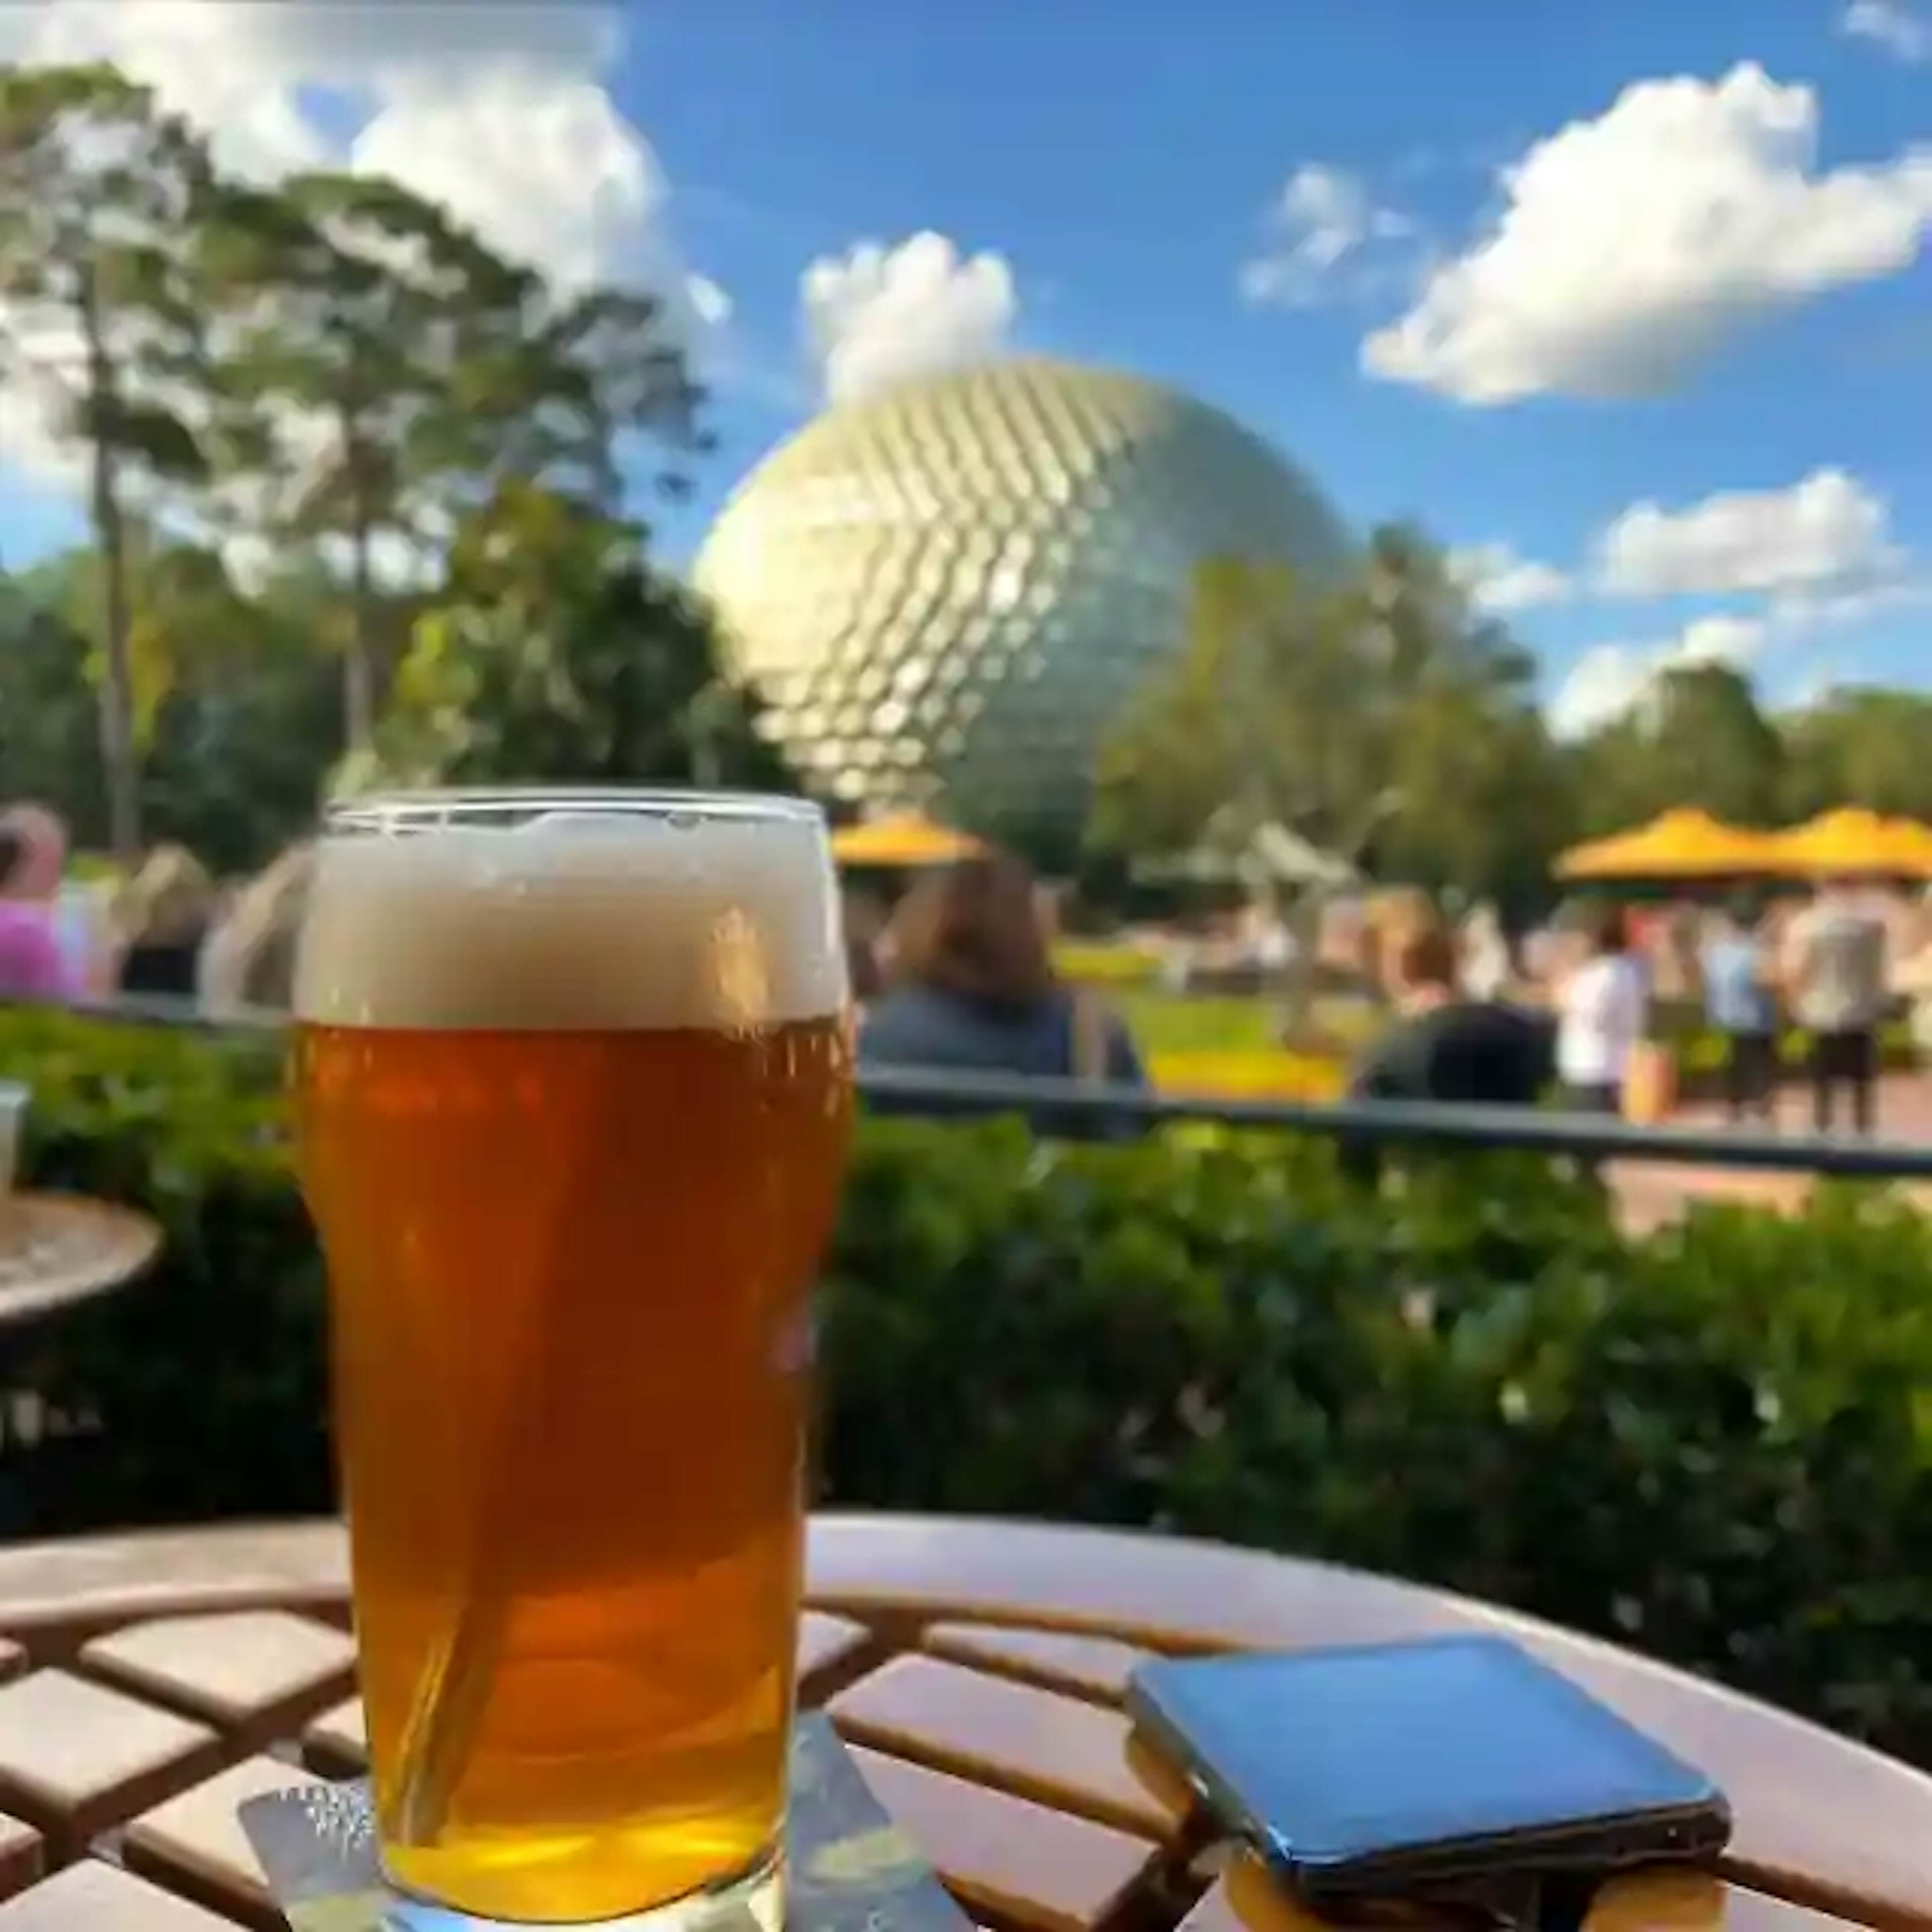 'Round the World at Epcot image